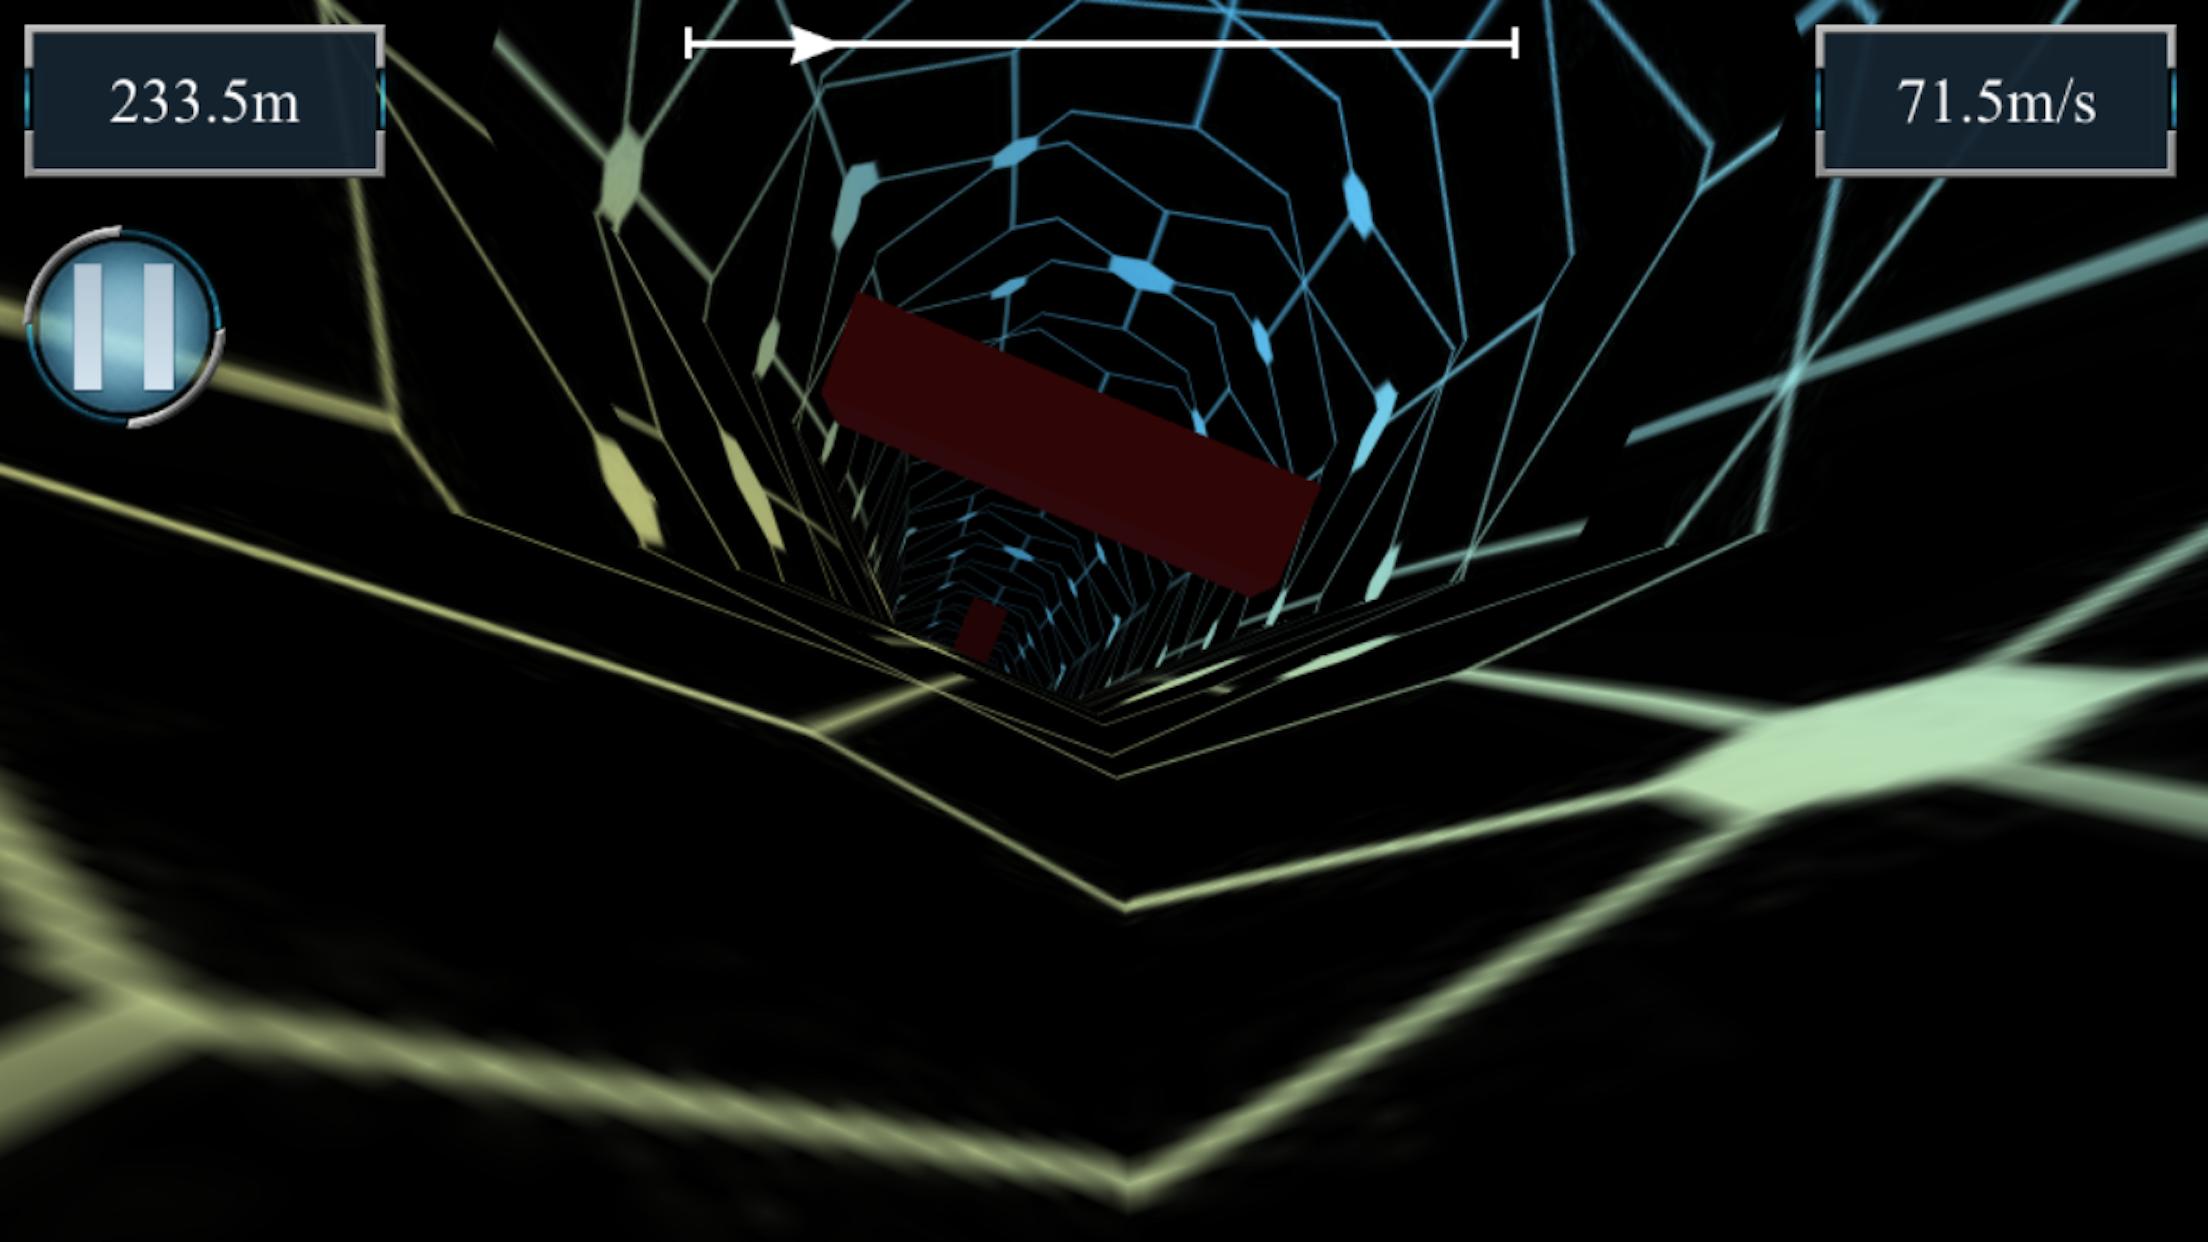 Tunnel Rush::Appstore for Android